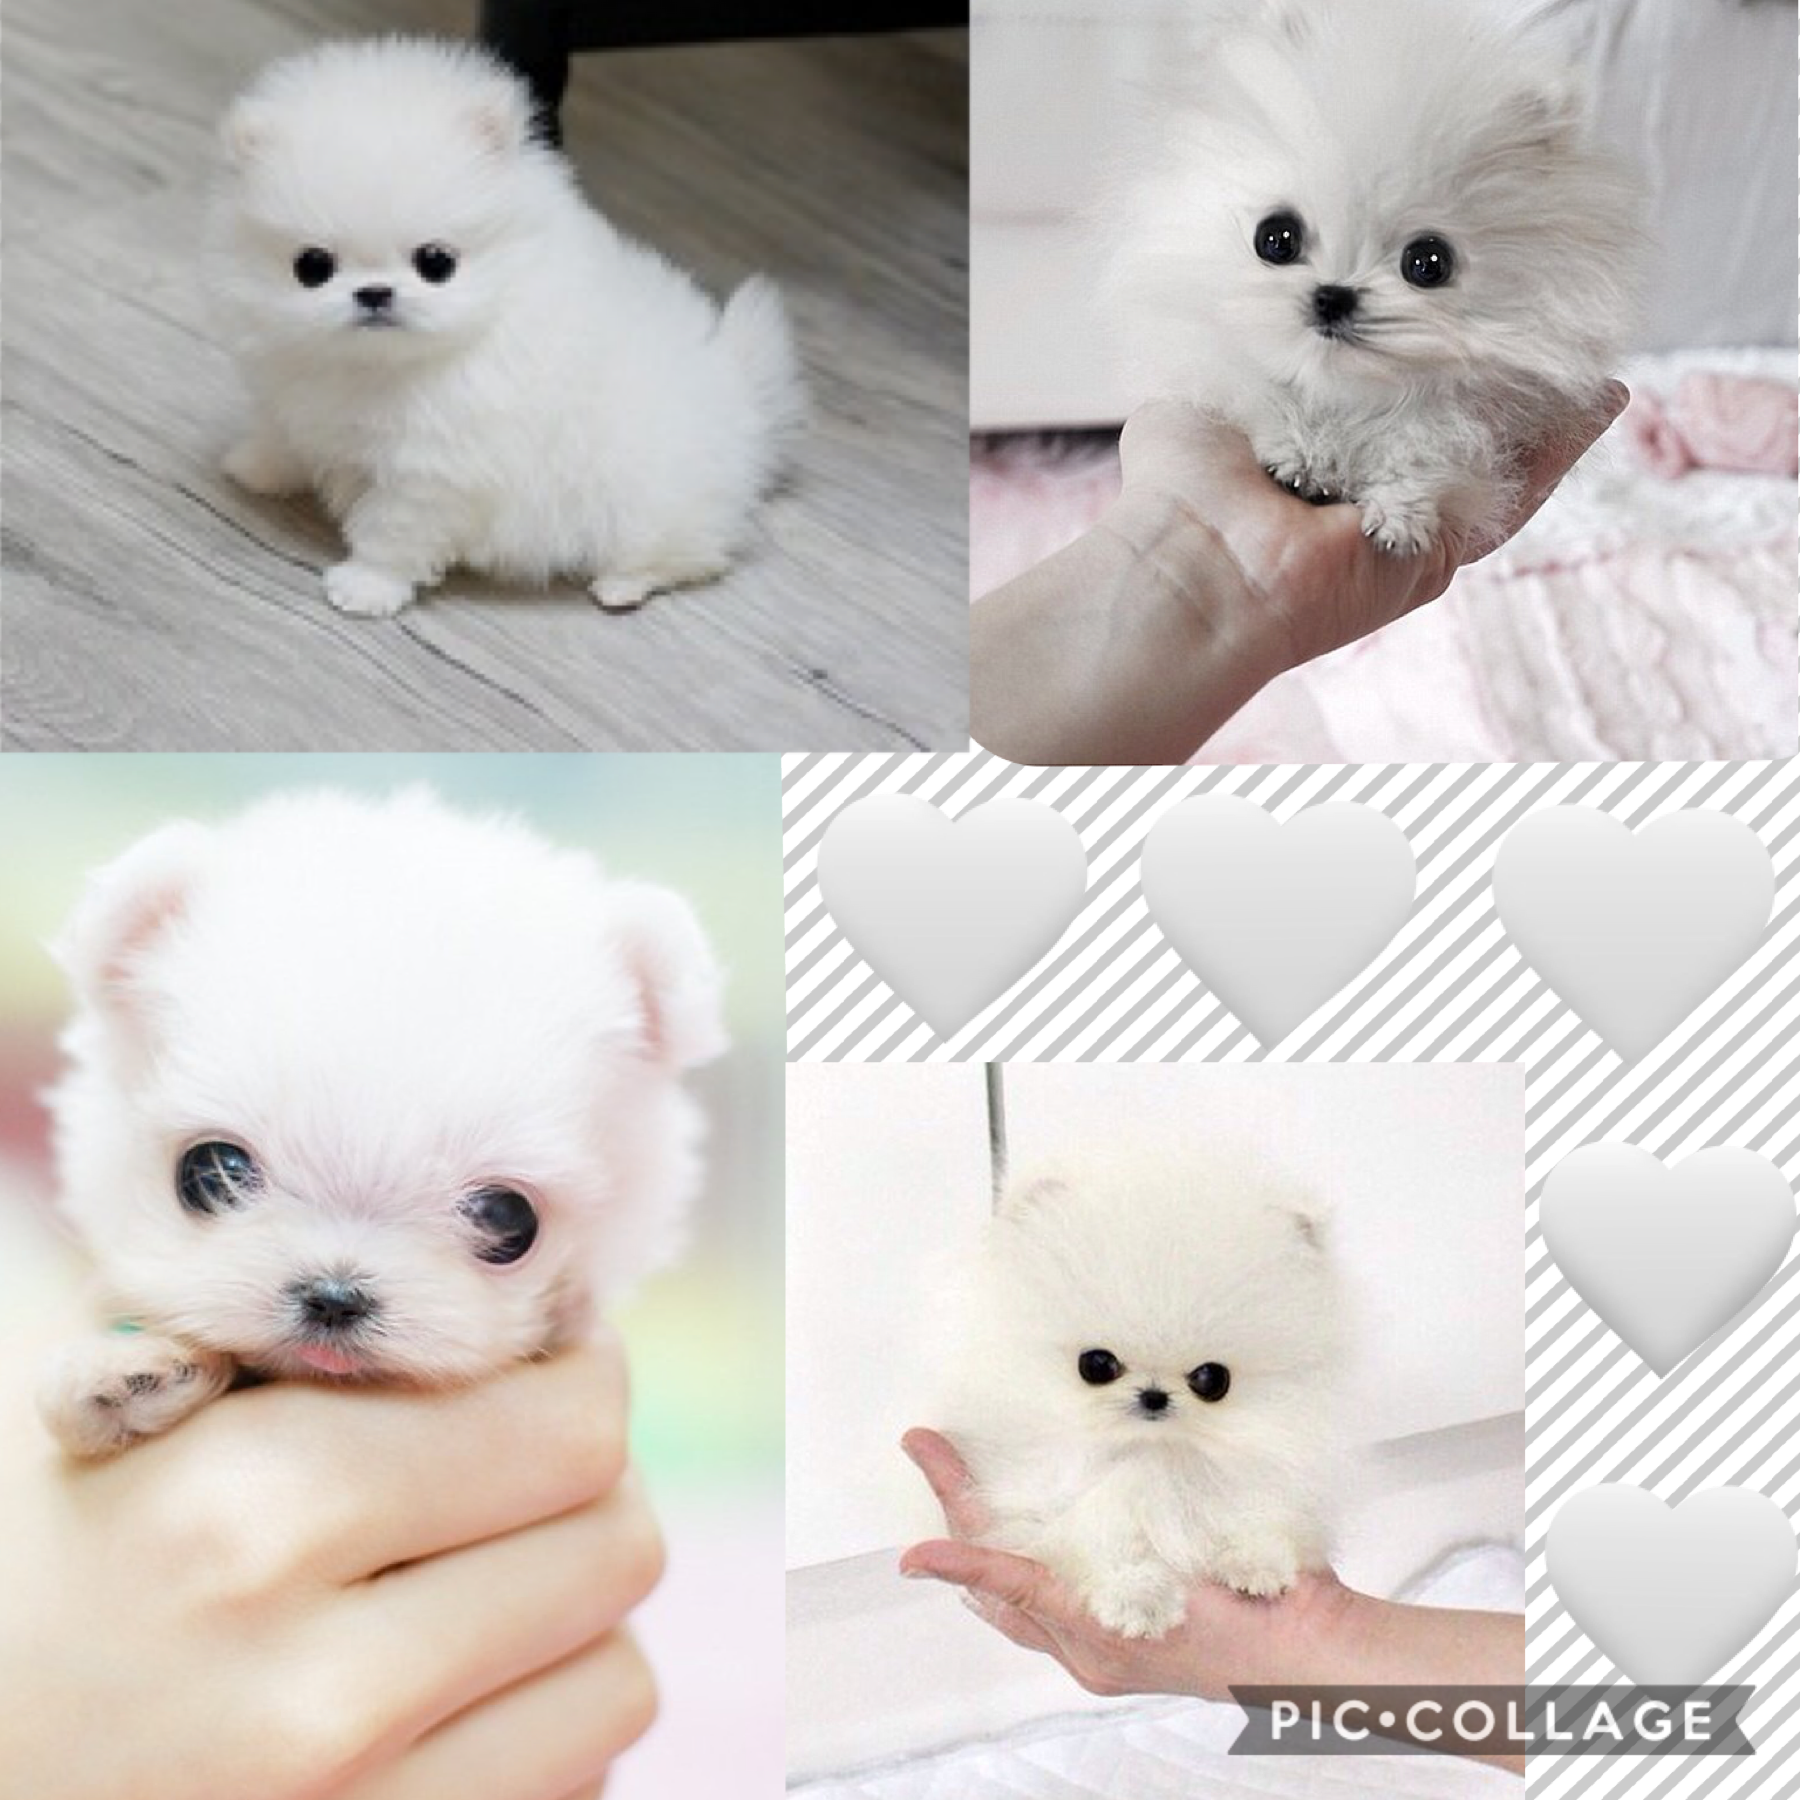 These white dogs are so cute 😍🥰